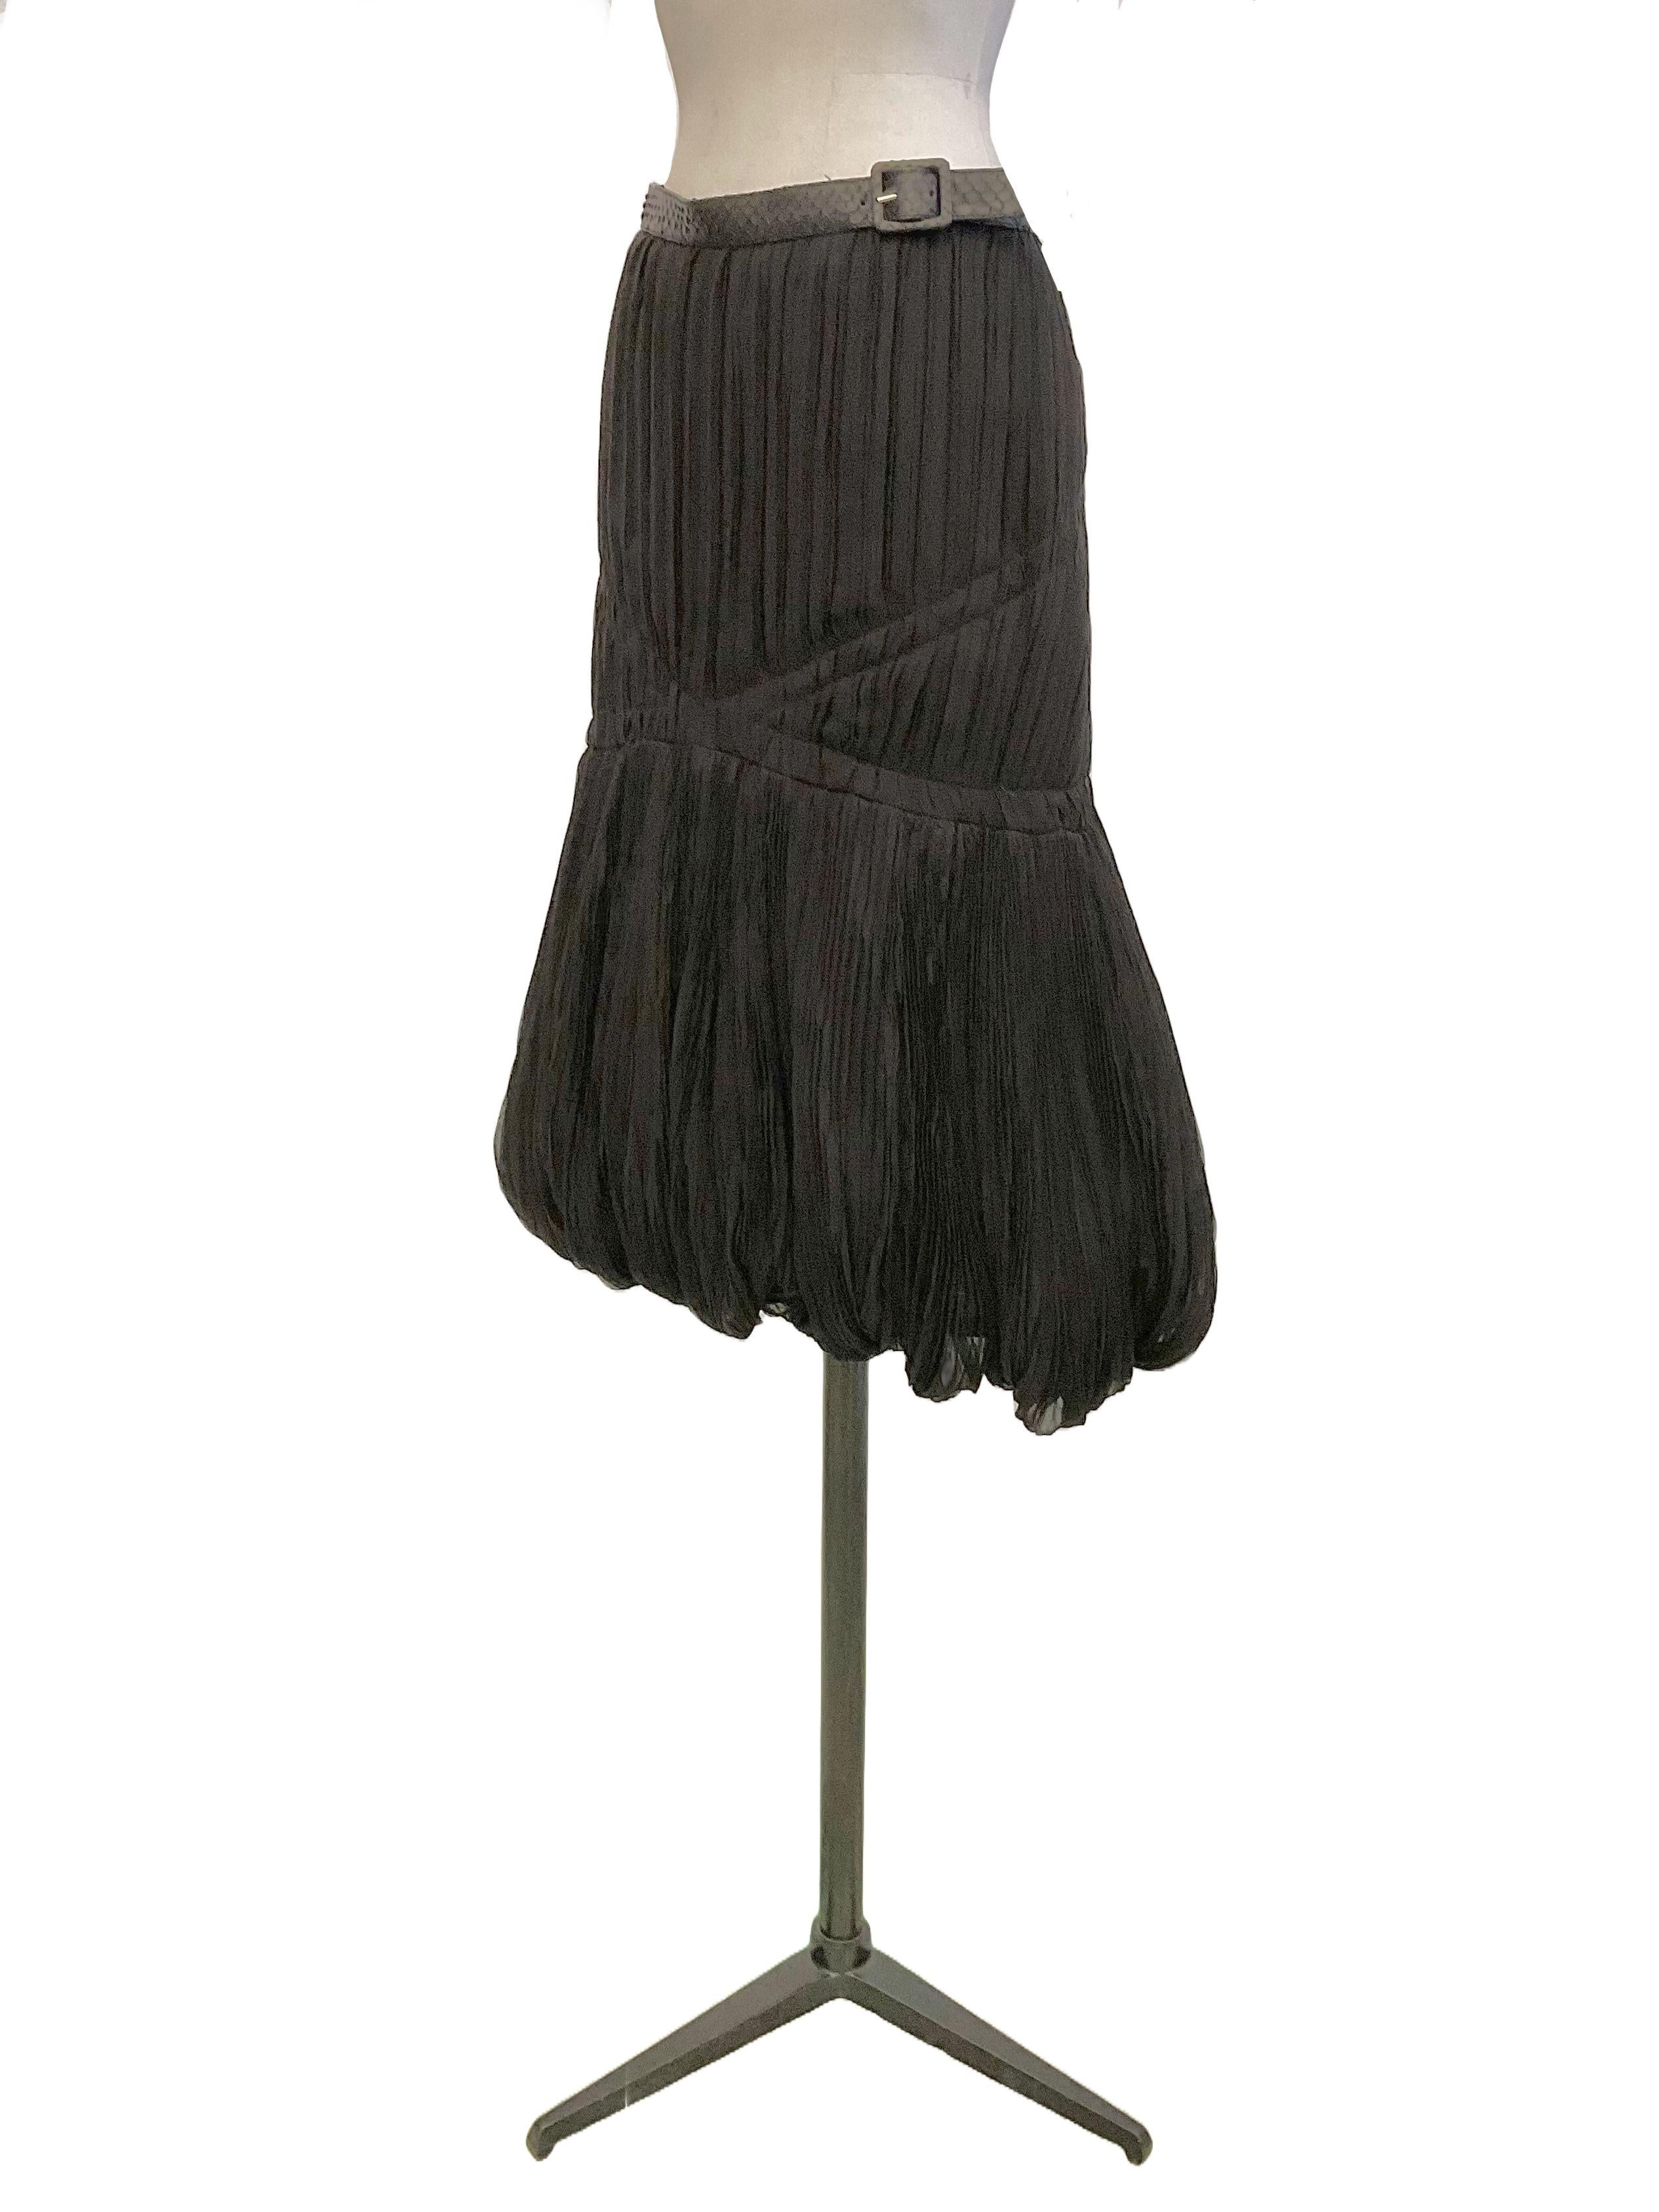 Black silk balloon skirt with python belt by Alexander McQueen from the Ready to Wear Fall Winter 2008 collection.
The surface of the skirt is moved by vertical pleating
irregular.
Ribbons sewn on the front that continue on the back simulate